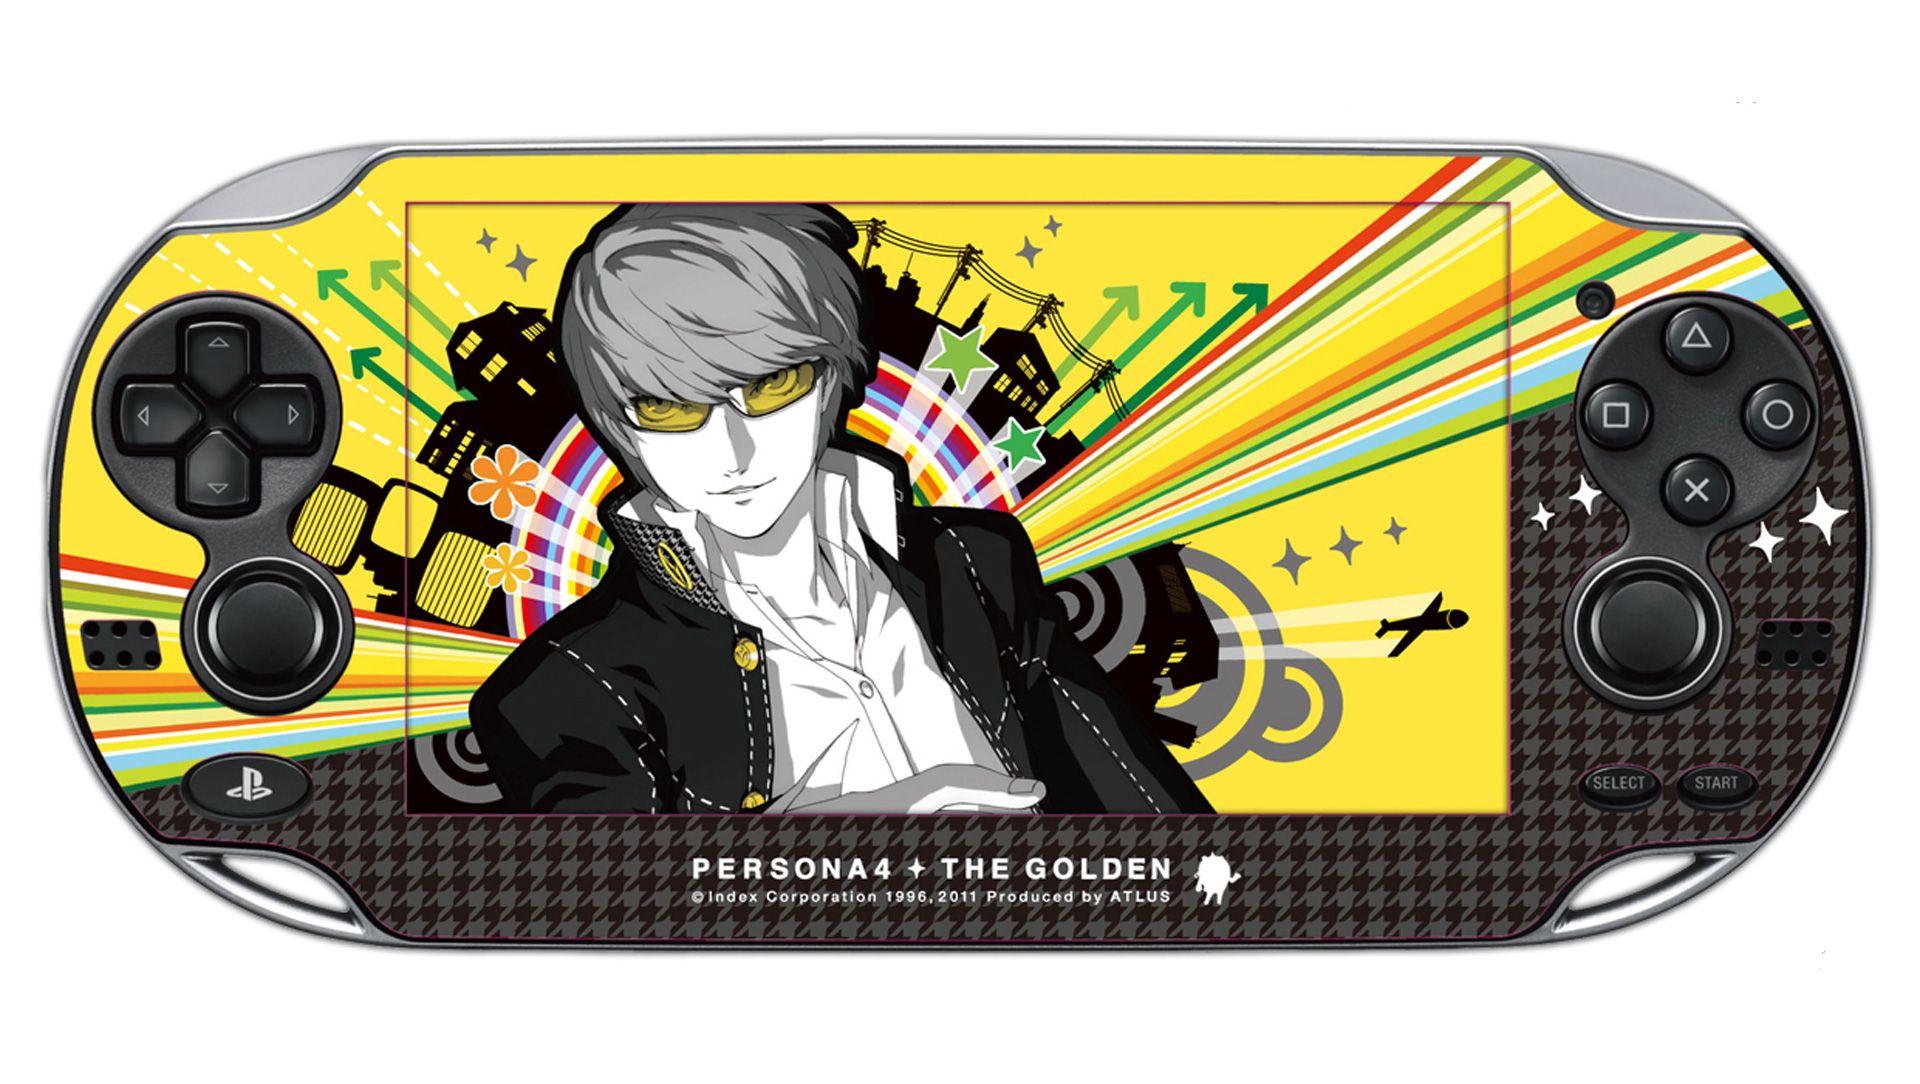 Persona 4 Golden Sony PS Vita Skin and You: An Application Guide